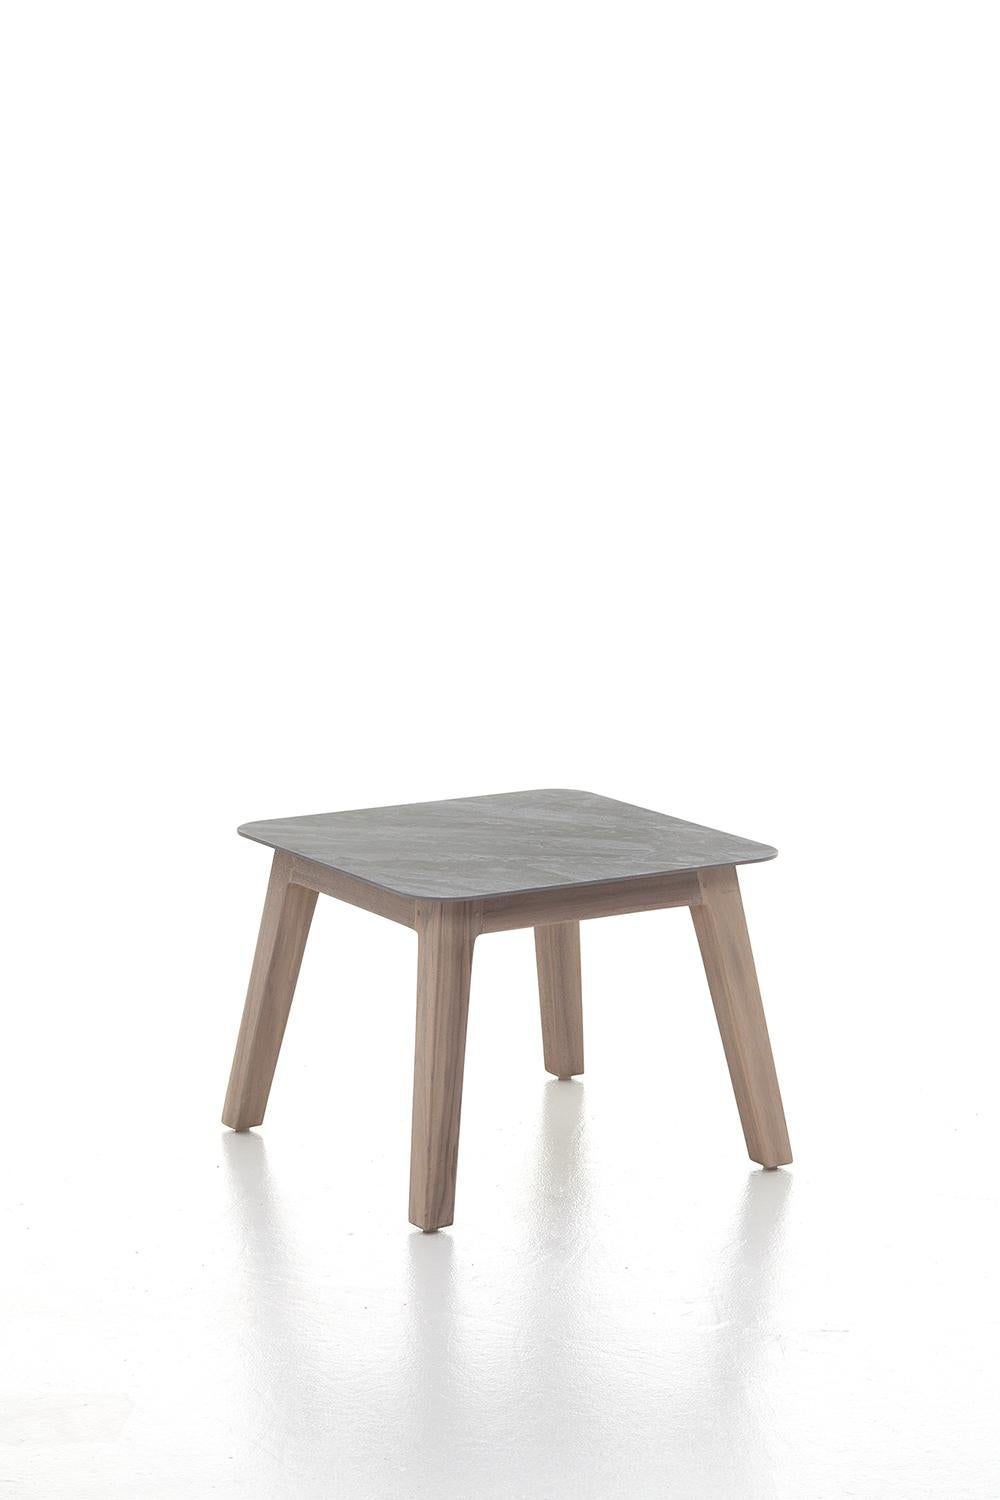 Gervasoni Inout 868 Coffee Table in Grey Porcelain Stoneware Top and Washed Teak In New Condition For Sale In Brooklyn, NY